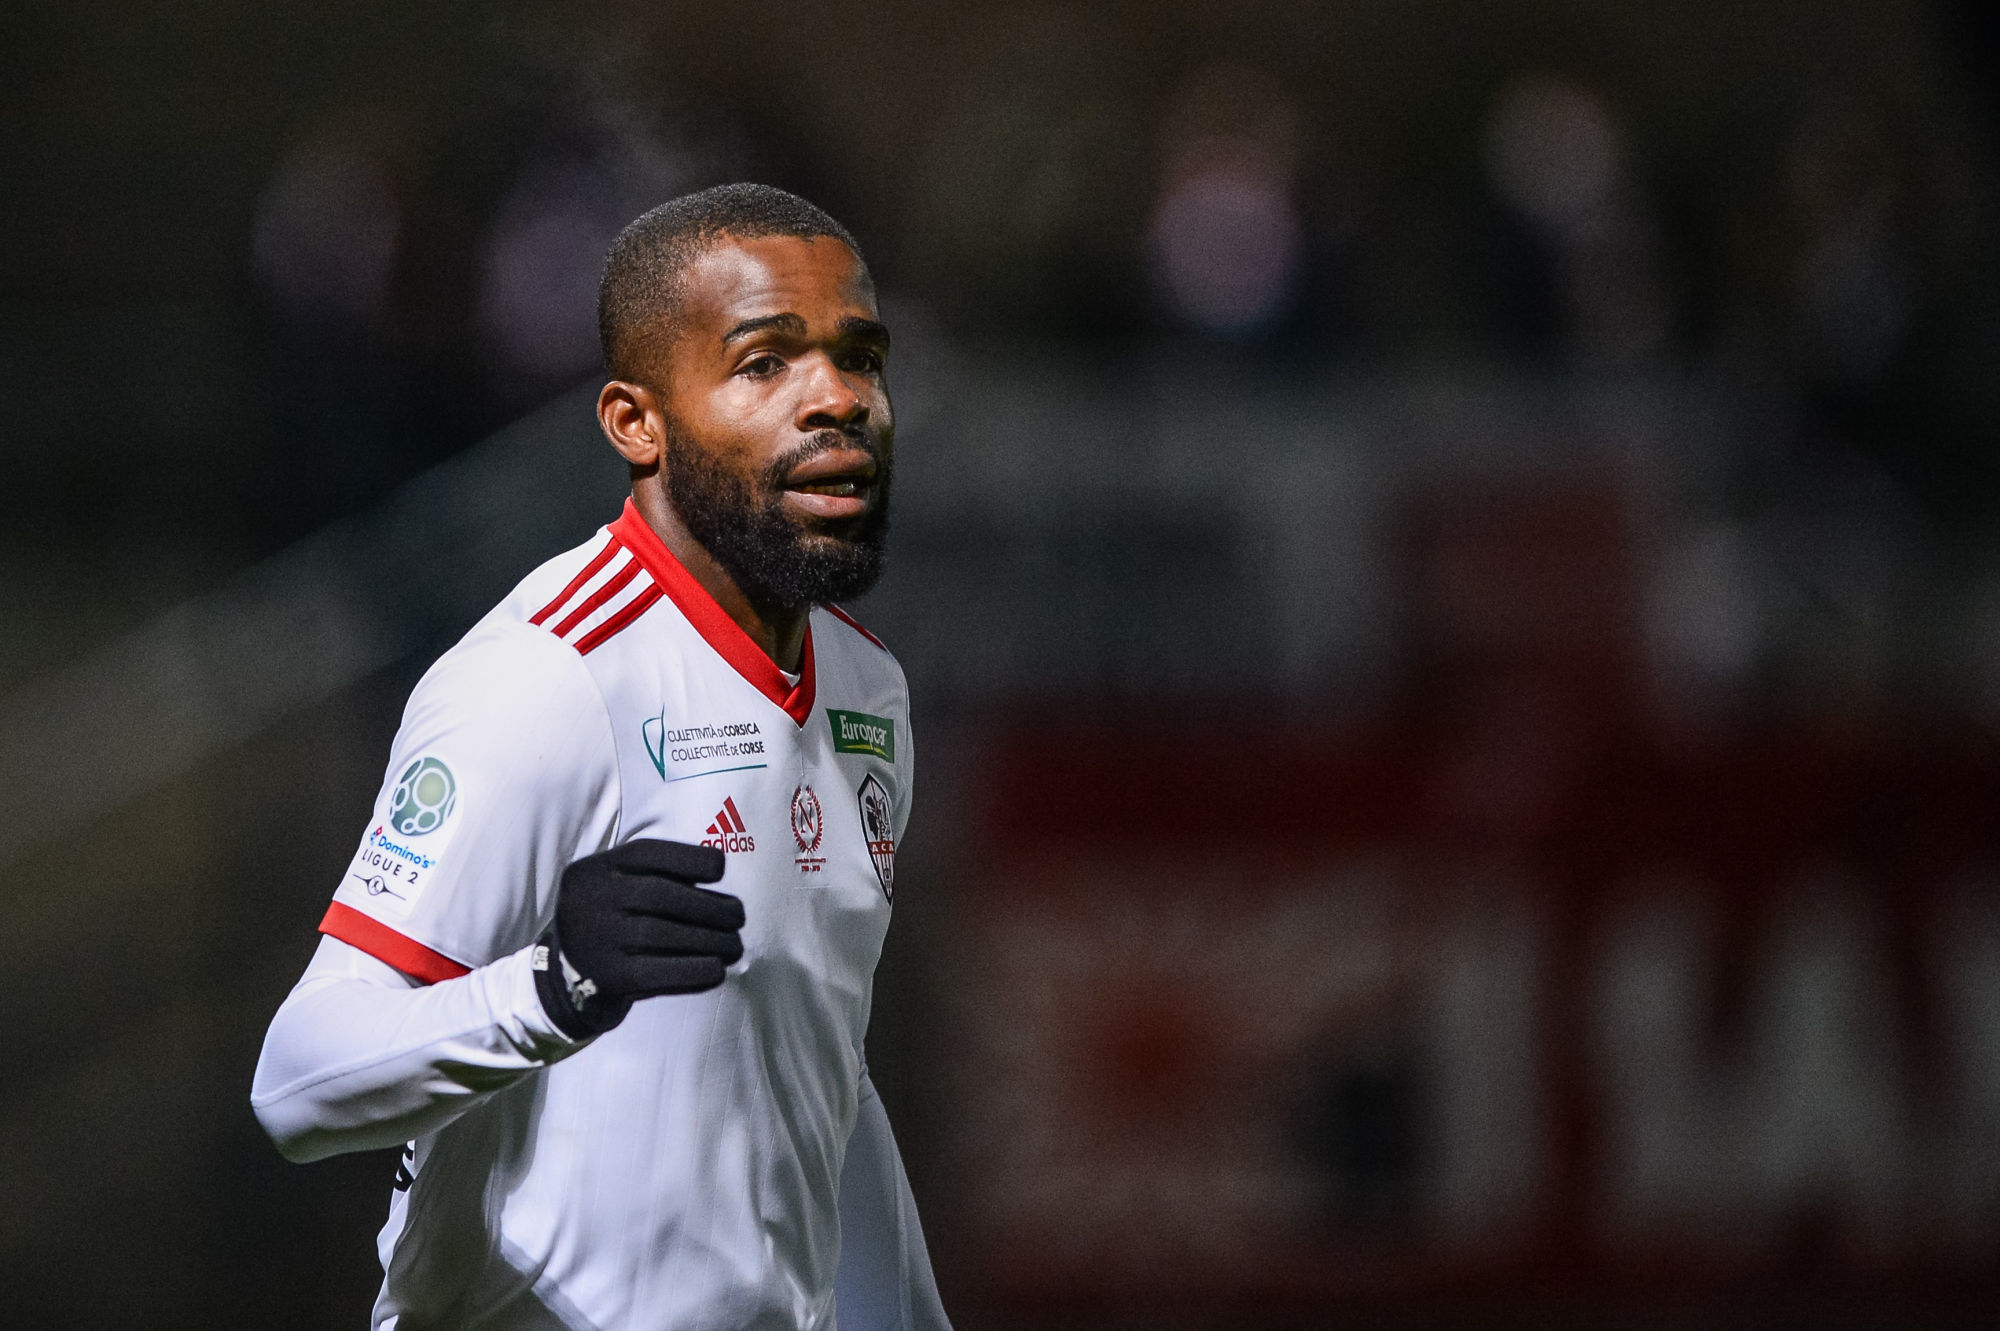 Gedeon KALULU of AC Ajaccio during the French Ligue 2 Football match between Chambly and Ajaccio at Stade Pierre Brisson on November 29, 2019 in Beauvais, France. (Photo by Baptiste Fernandez/Icon Sport) - Gedeon KALULU - Stade des Marais - Chambly (France)